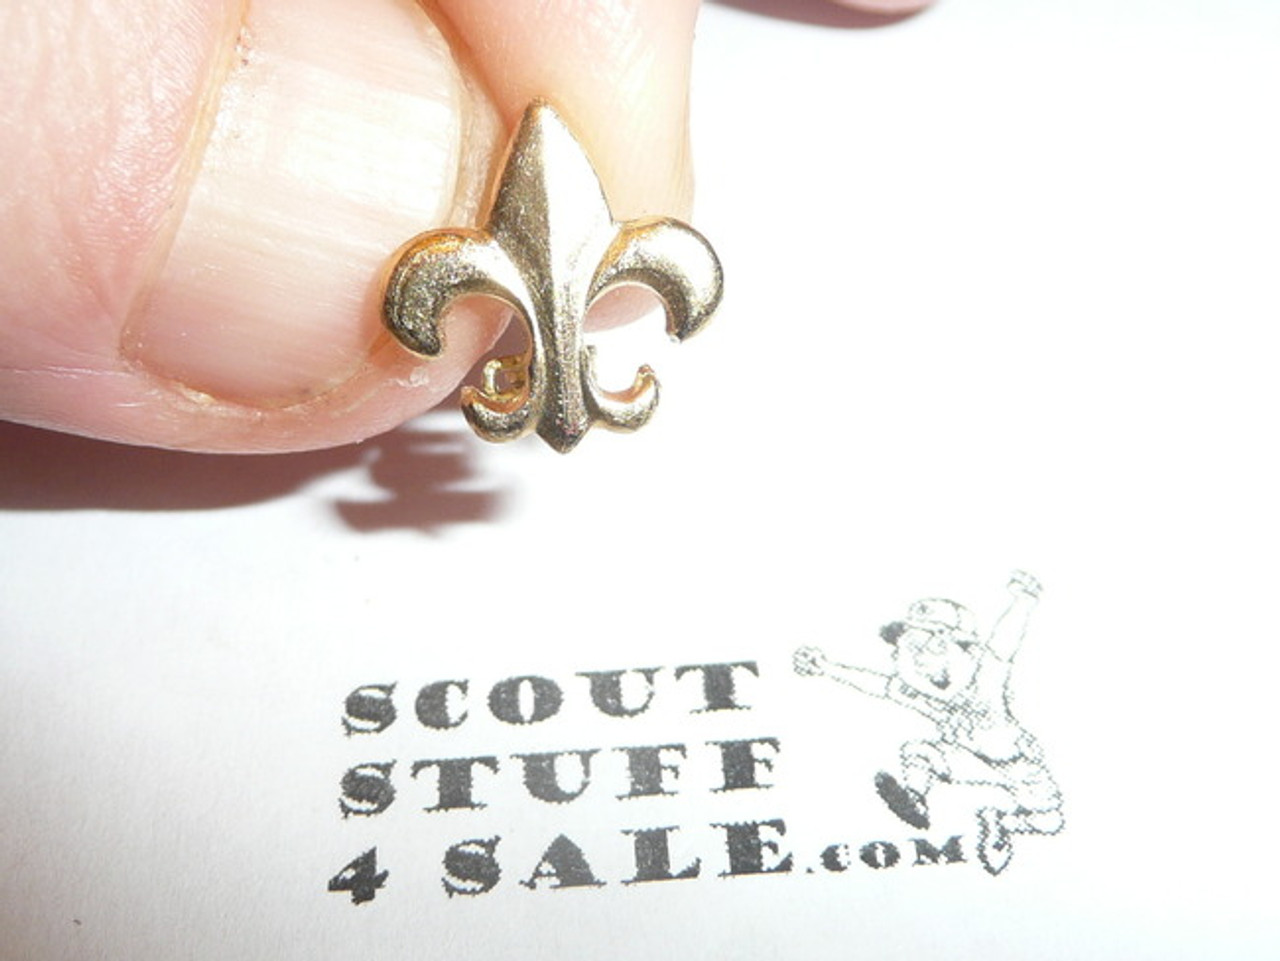 Scout Rank Mother's or Lapel Pin, spin lock pin, 12mm Tall